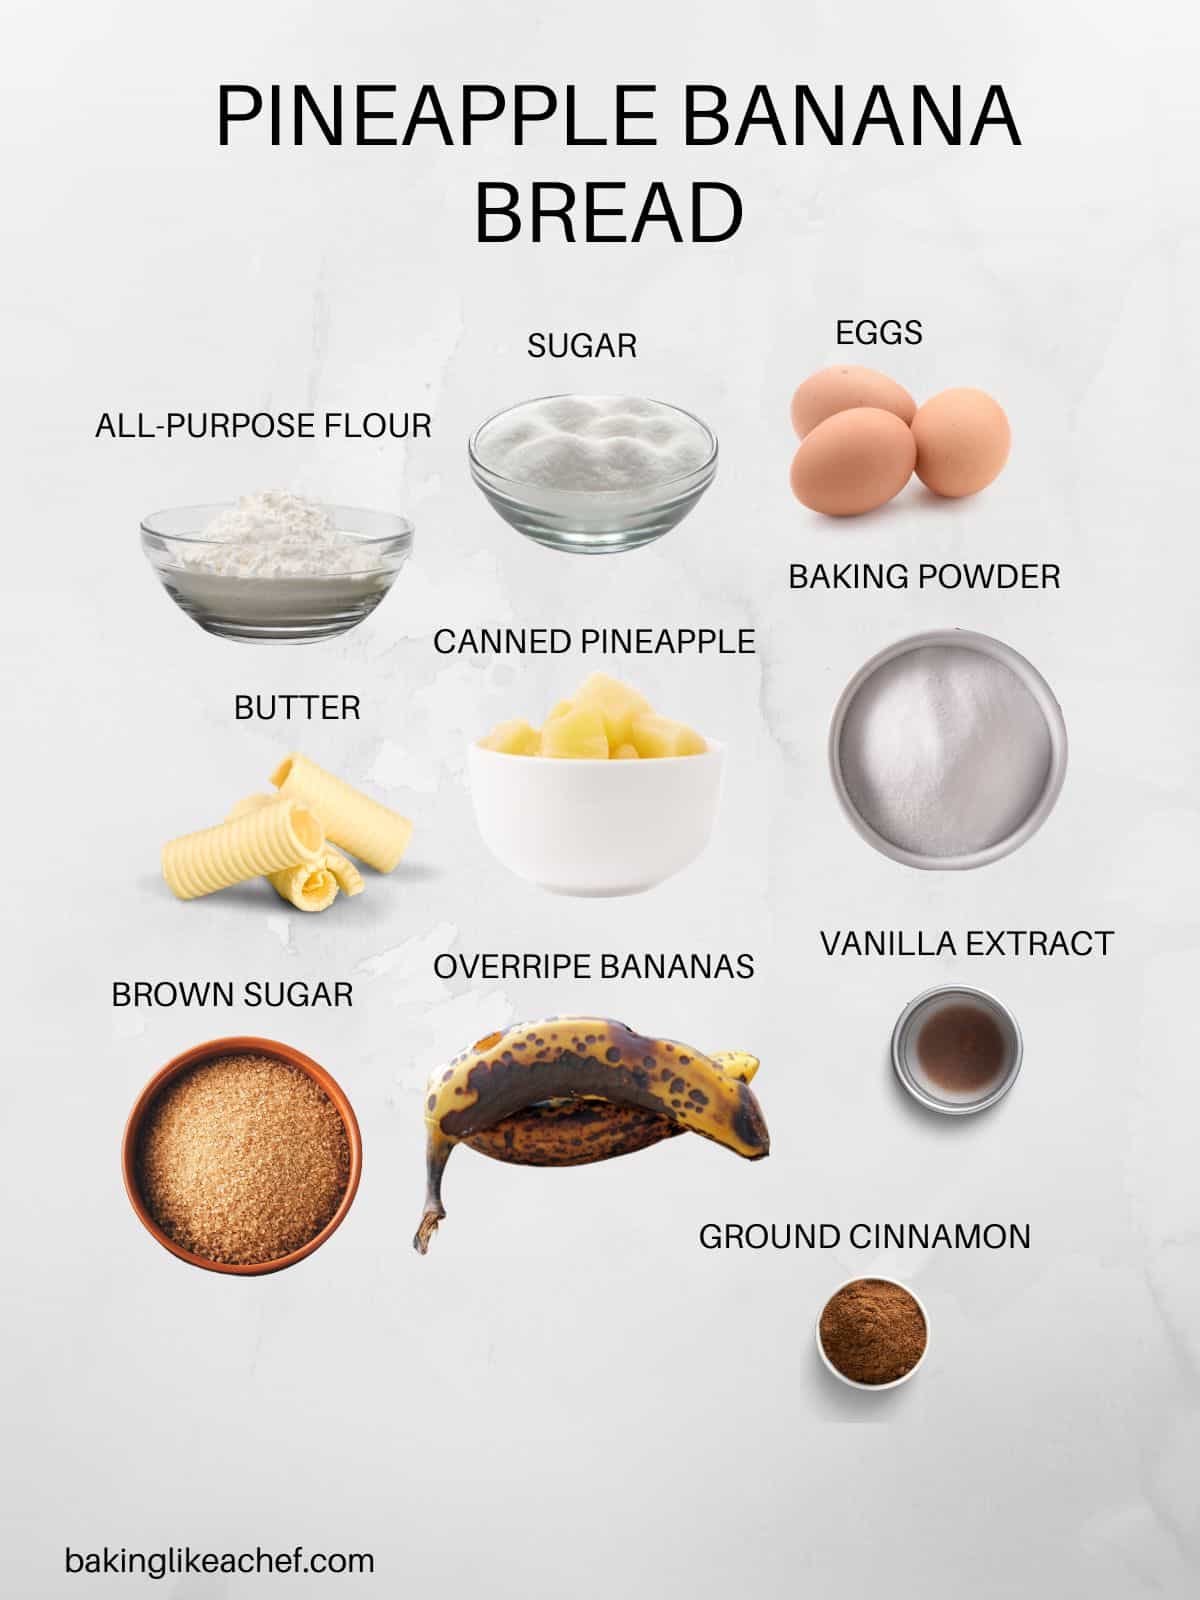 Pineapple banana bread ingredients in pictures